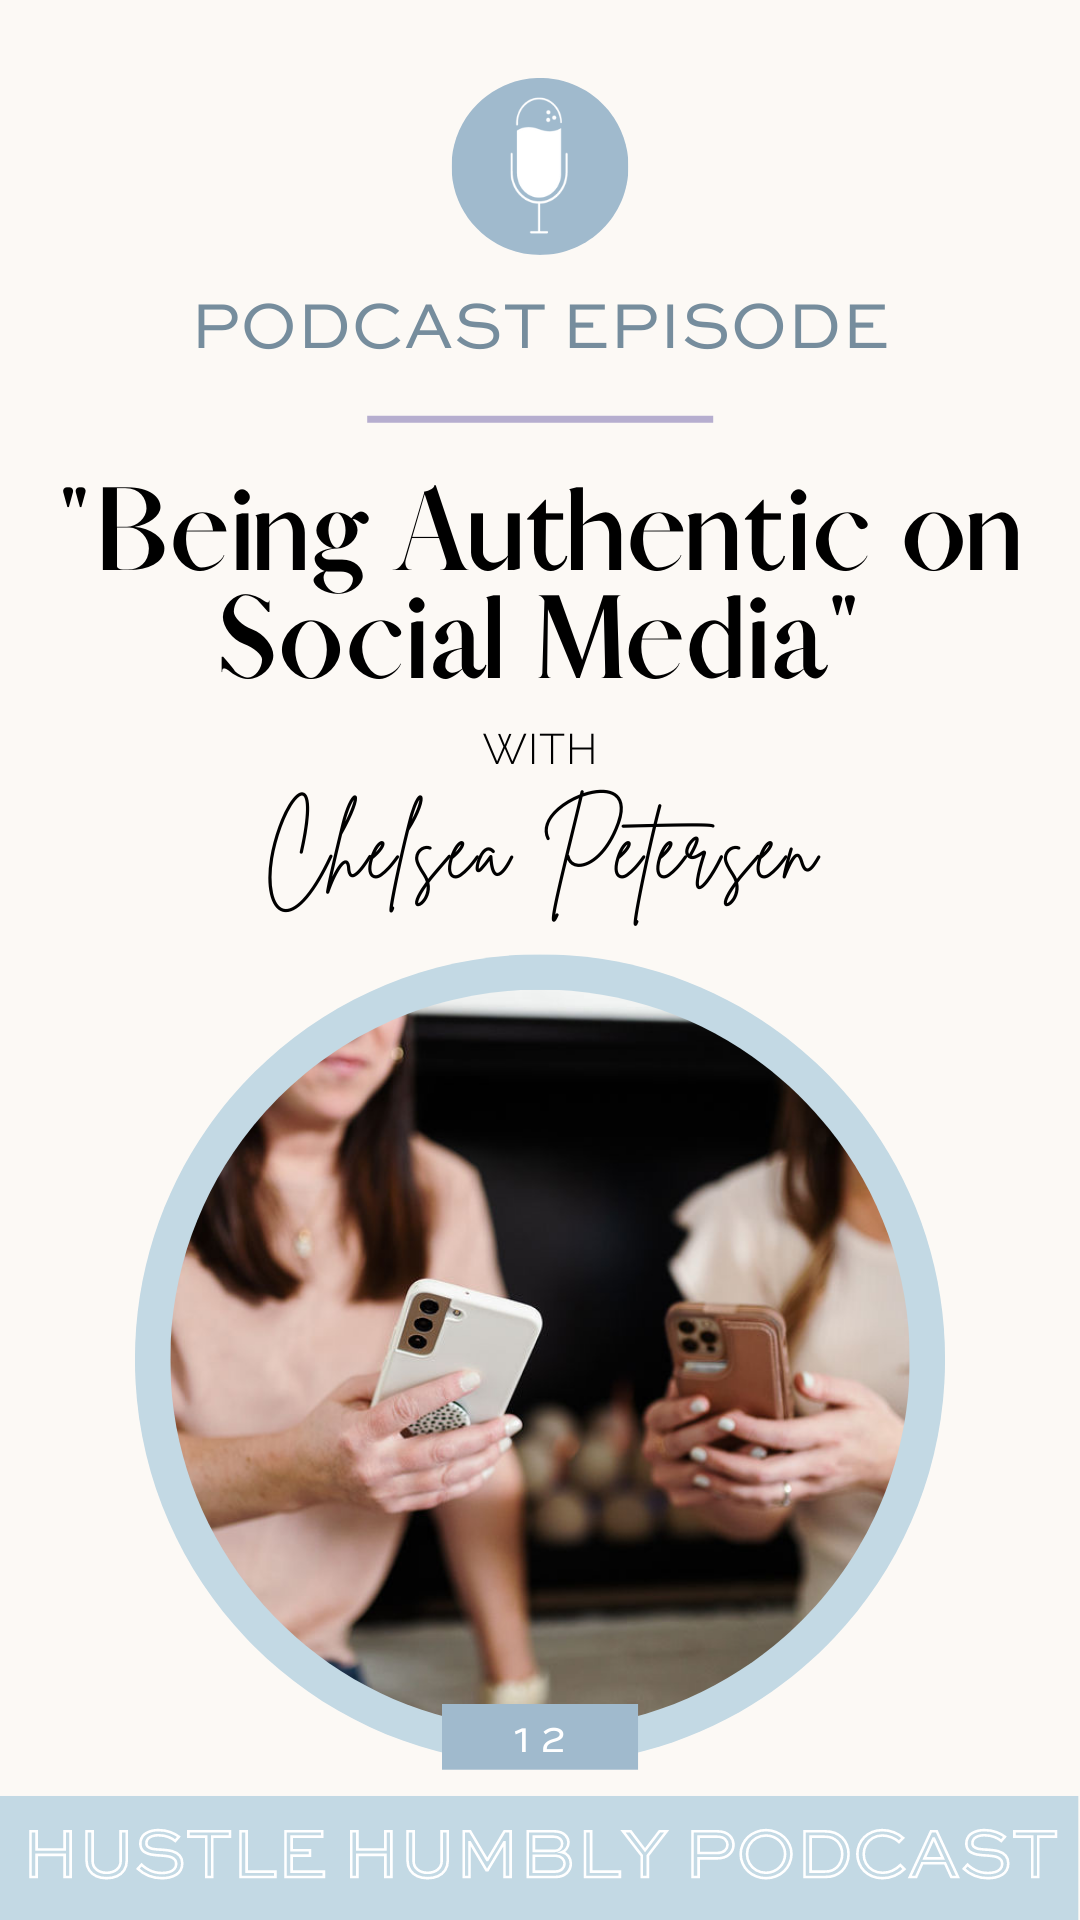 Being authentic on social media